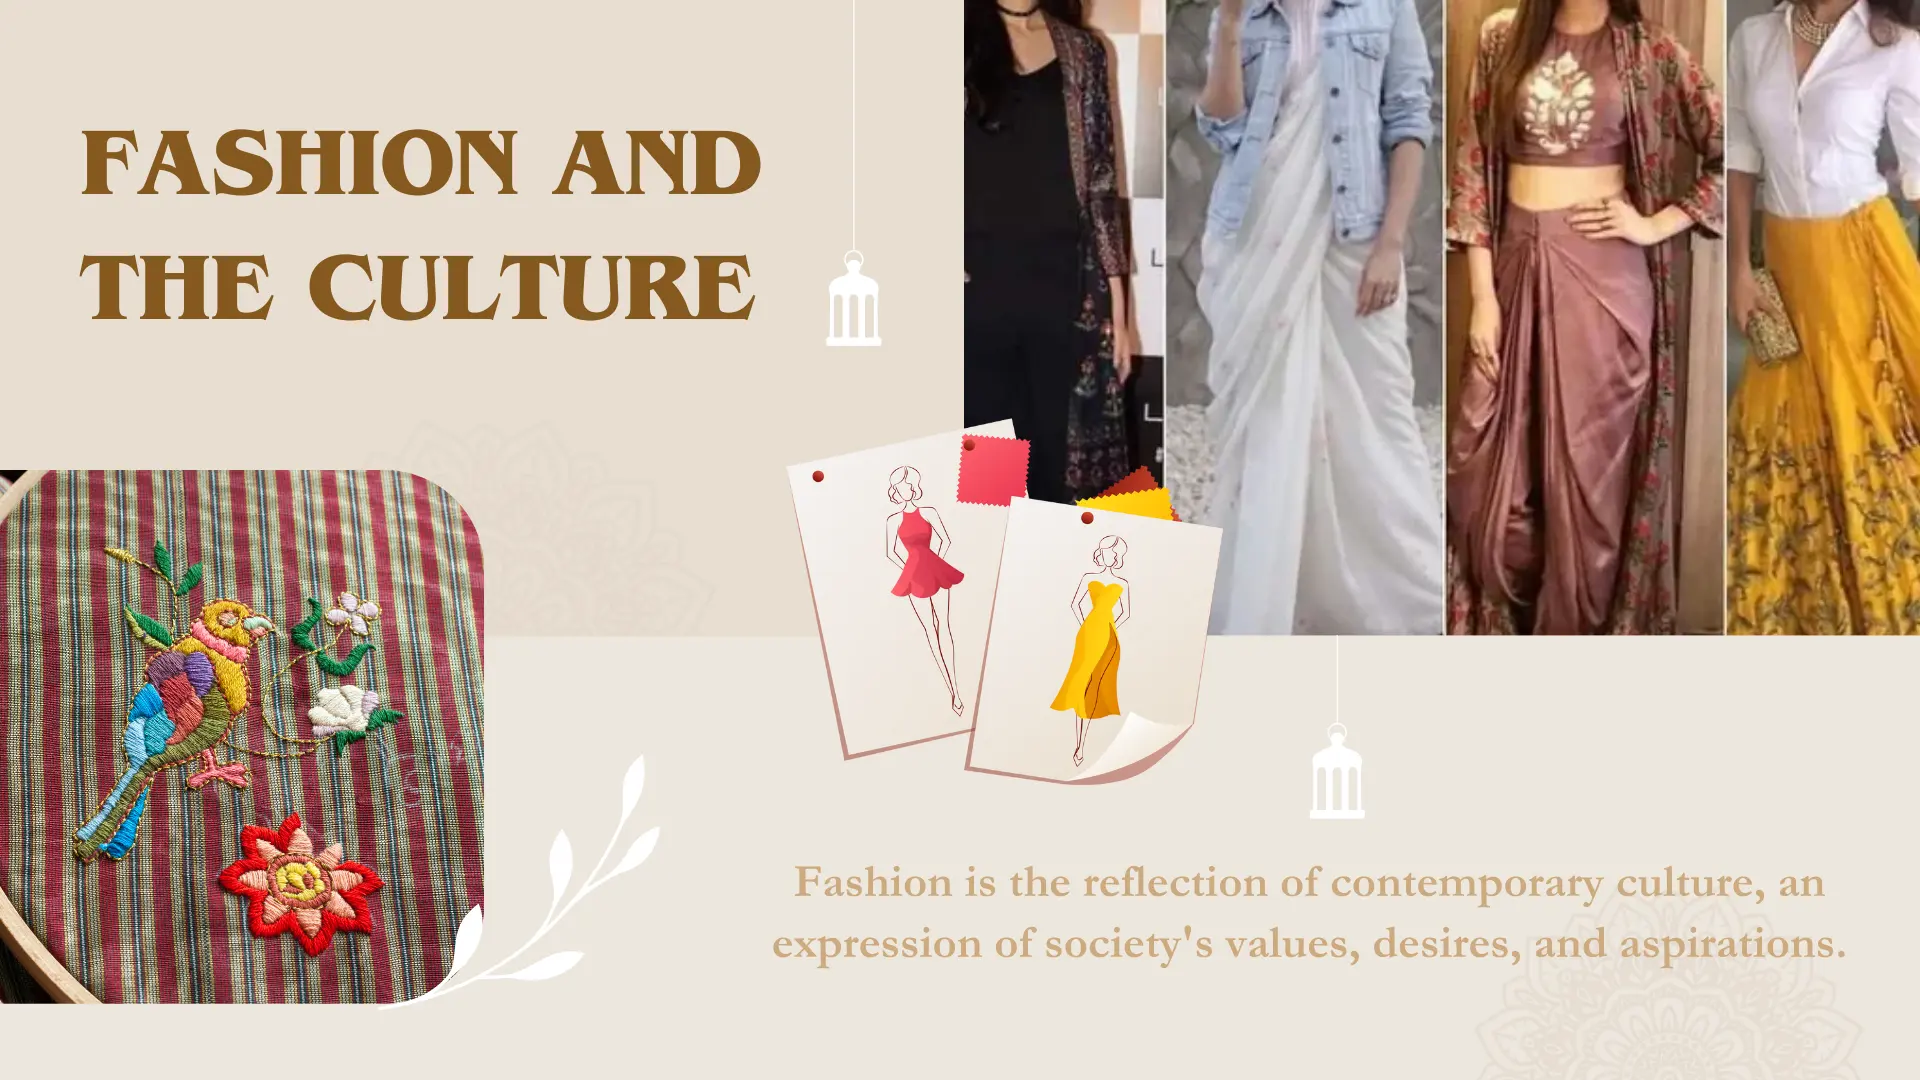 FASHION AND THE CULTURE